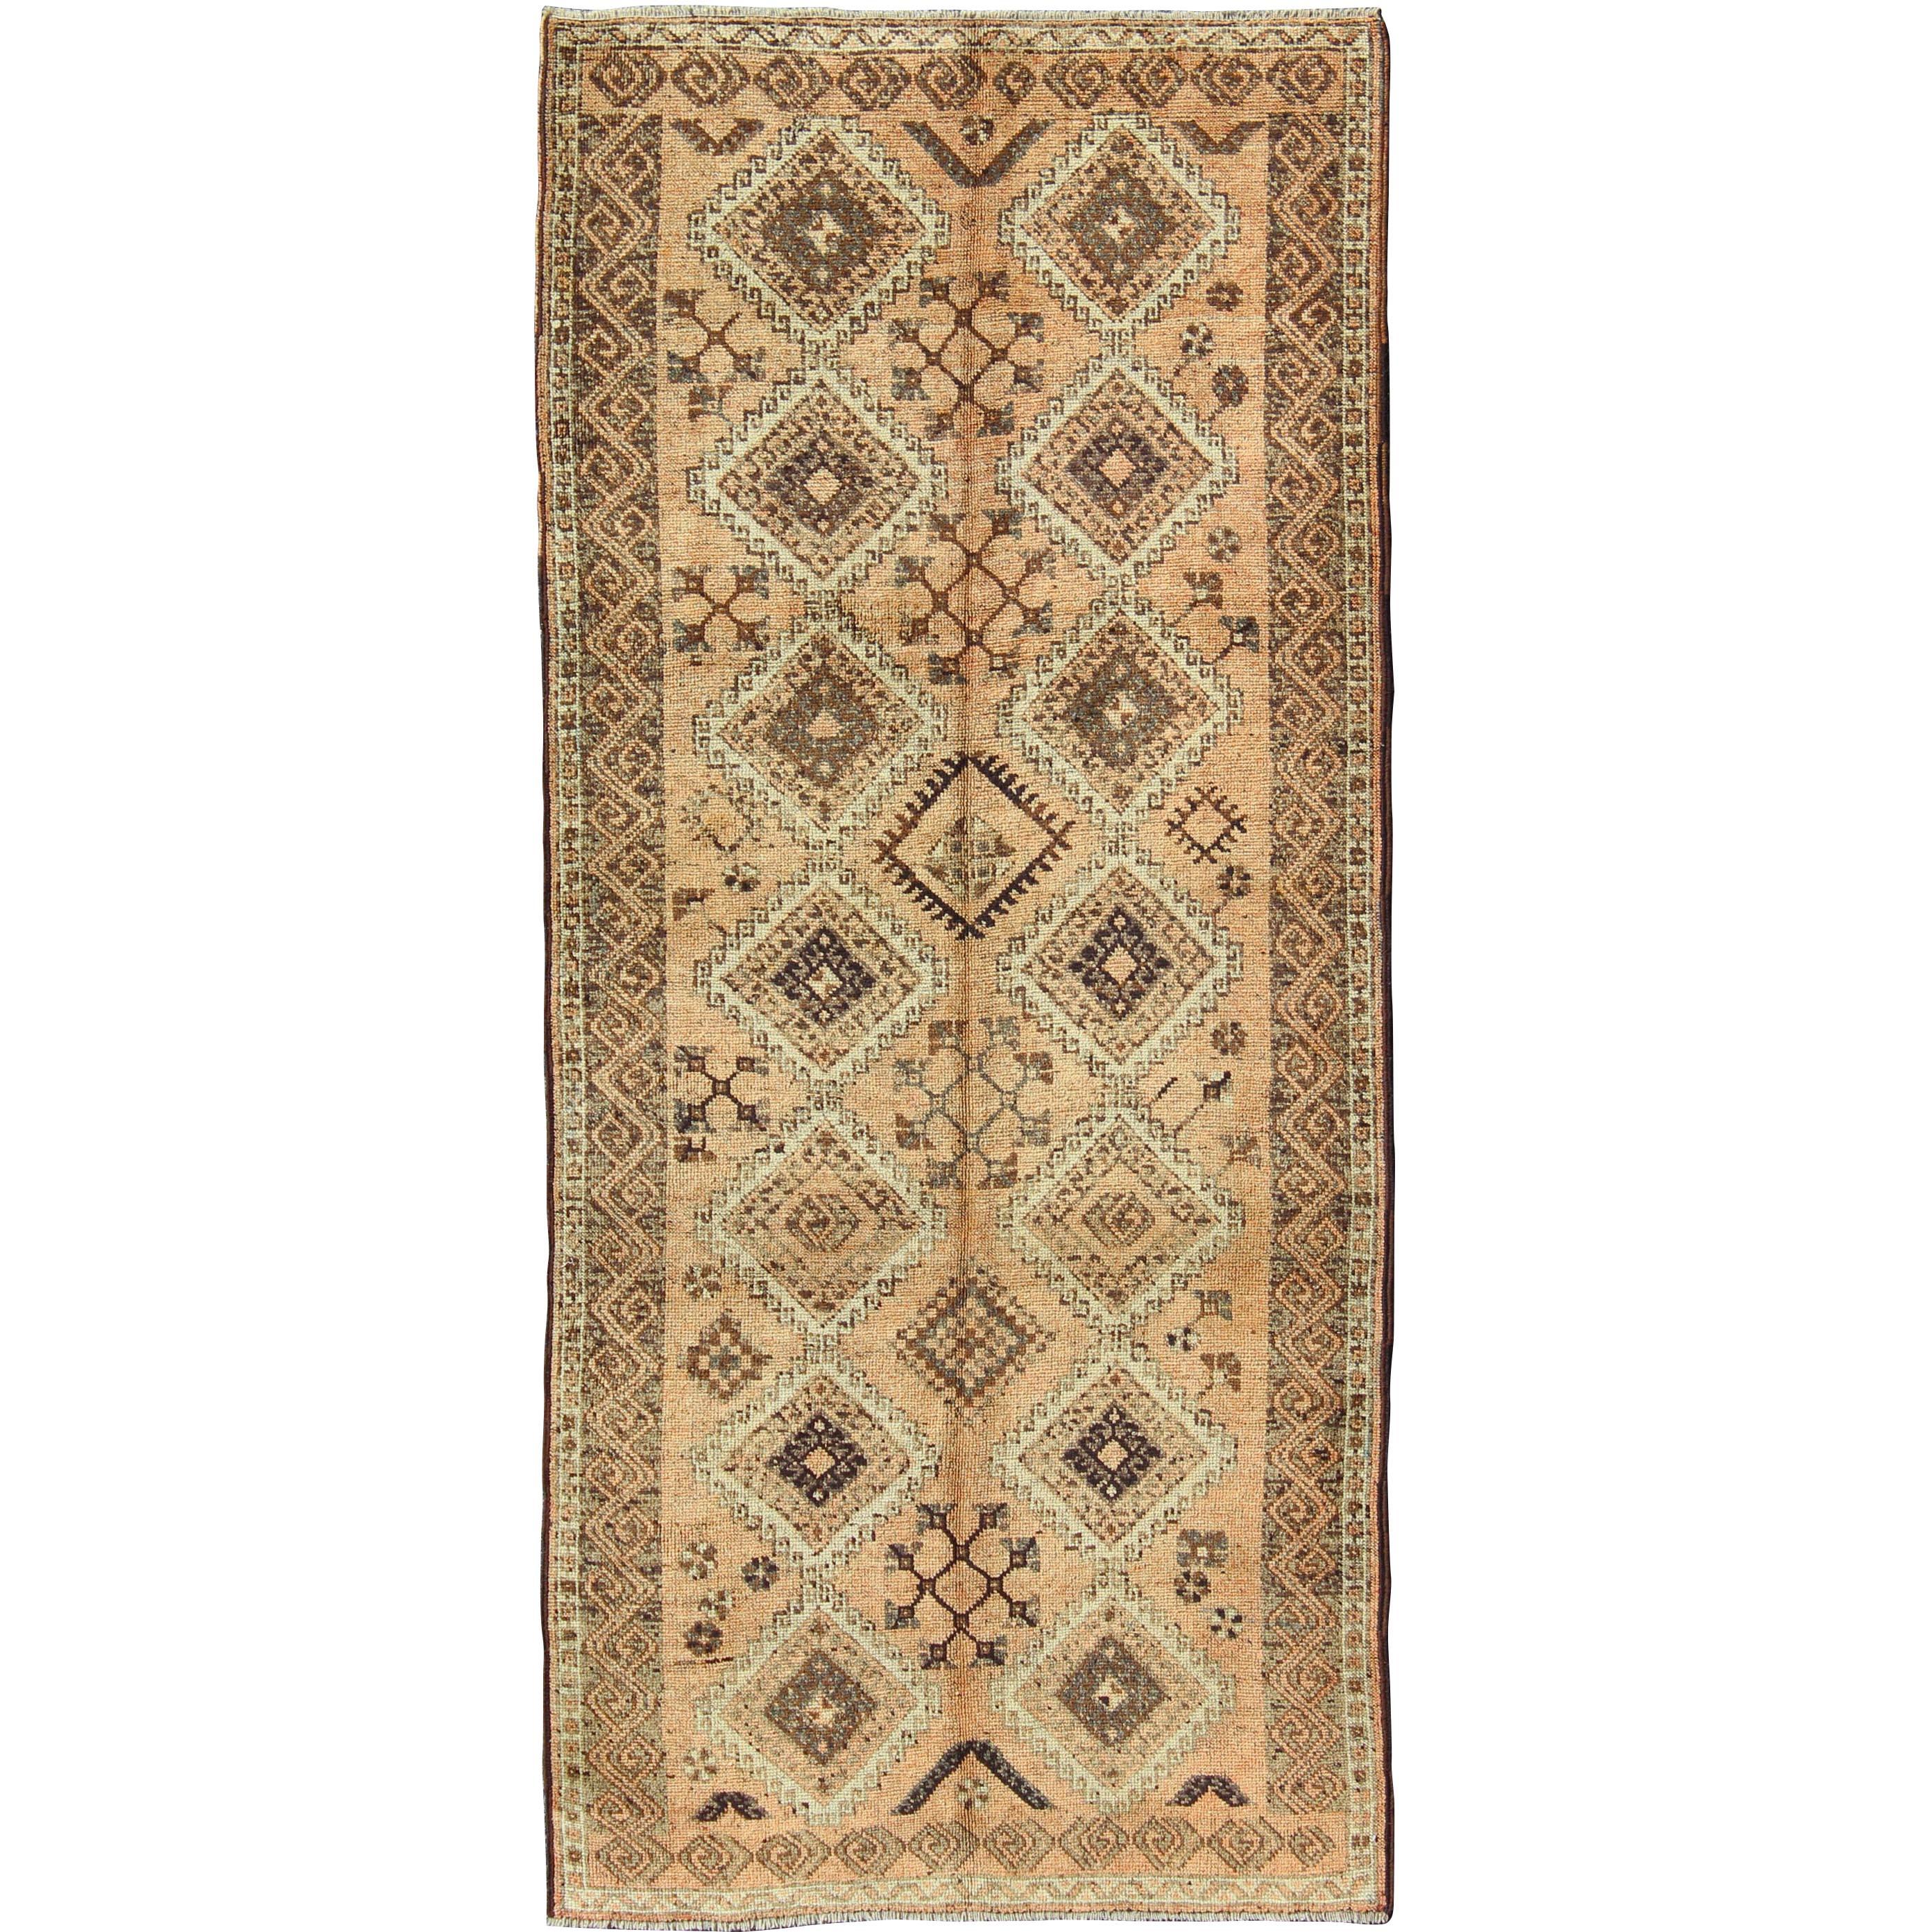 Vintage Tribal Turkish wide runner with Repeating Diamond & Geometric Motifs For Sale